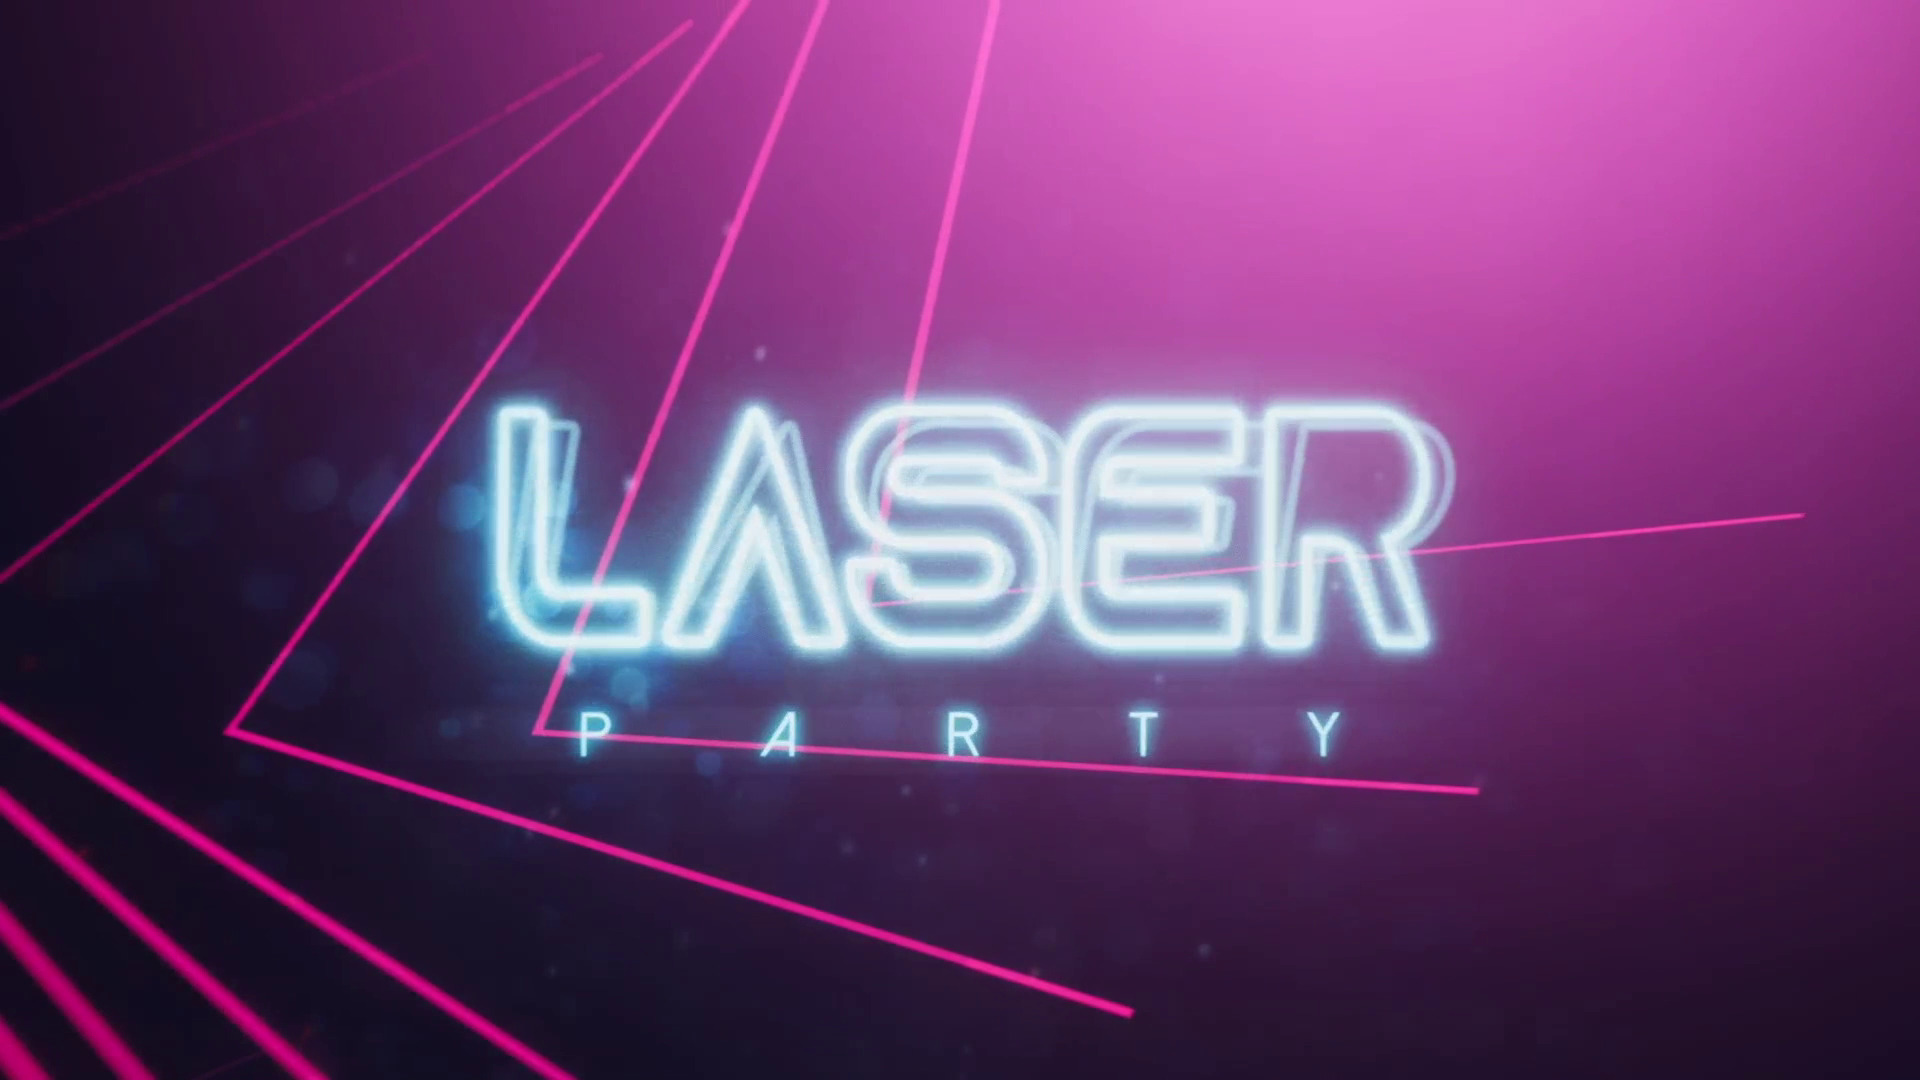 Laser Party